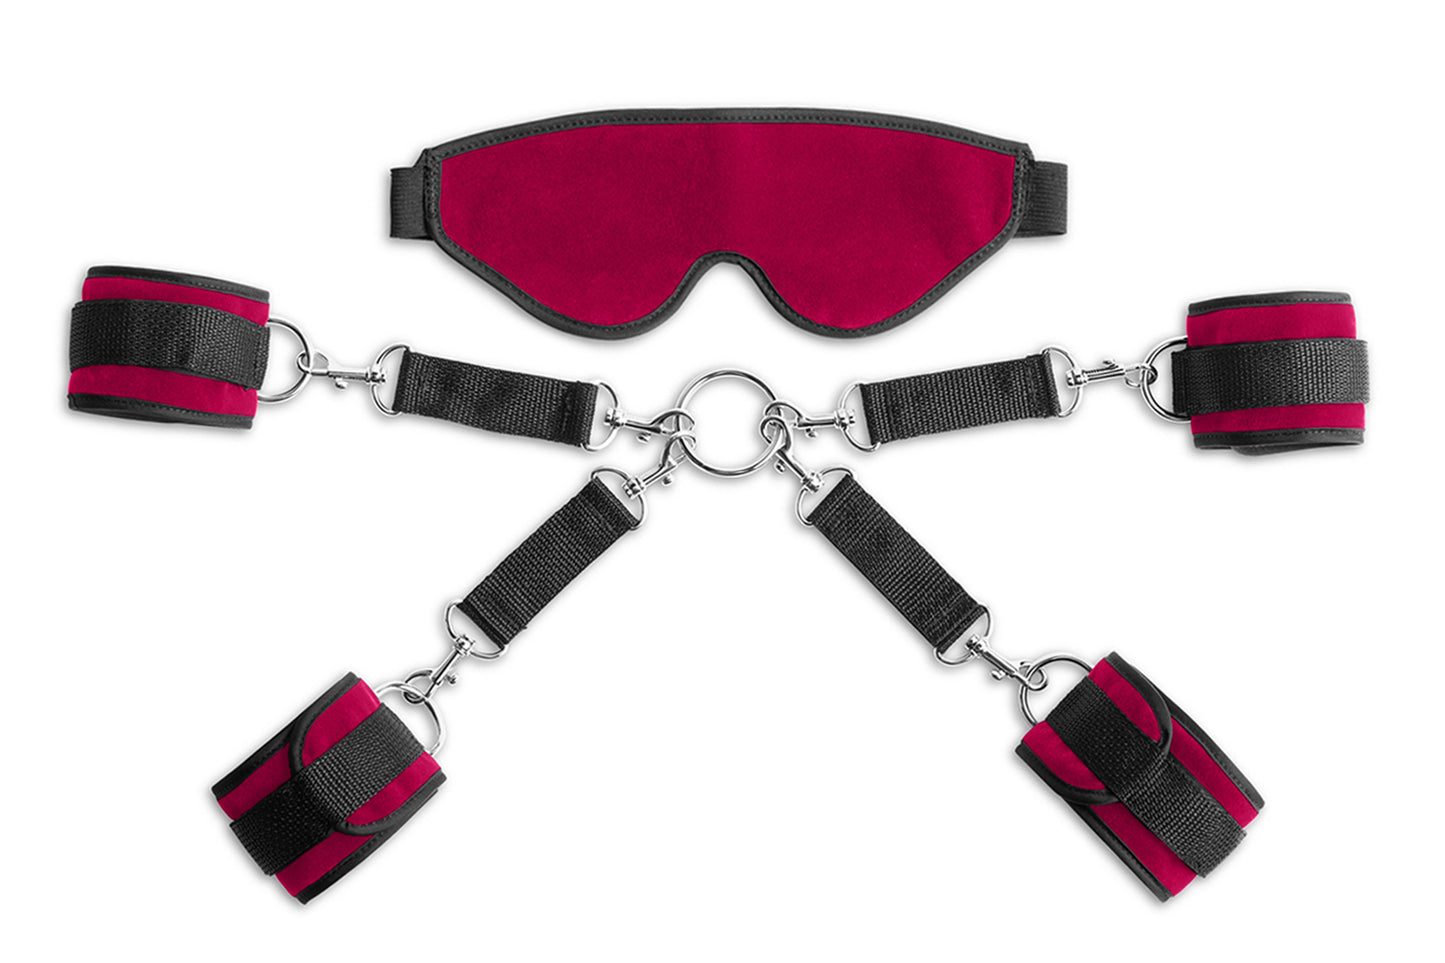 Liberator Bond Deluxe Cuff and Blindfold Kit